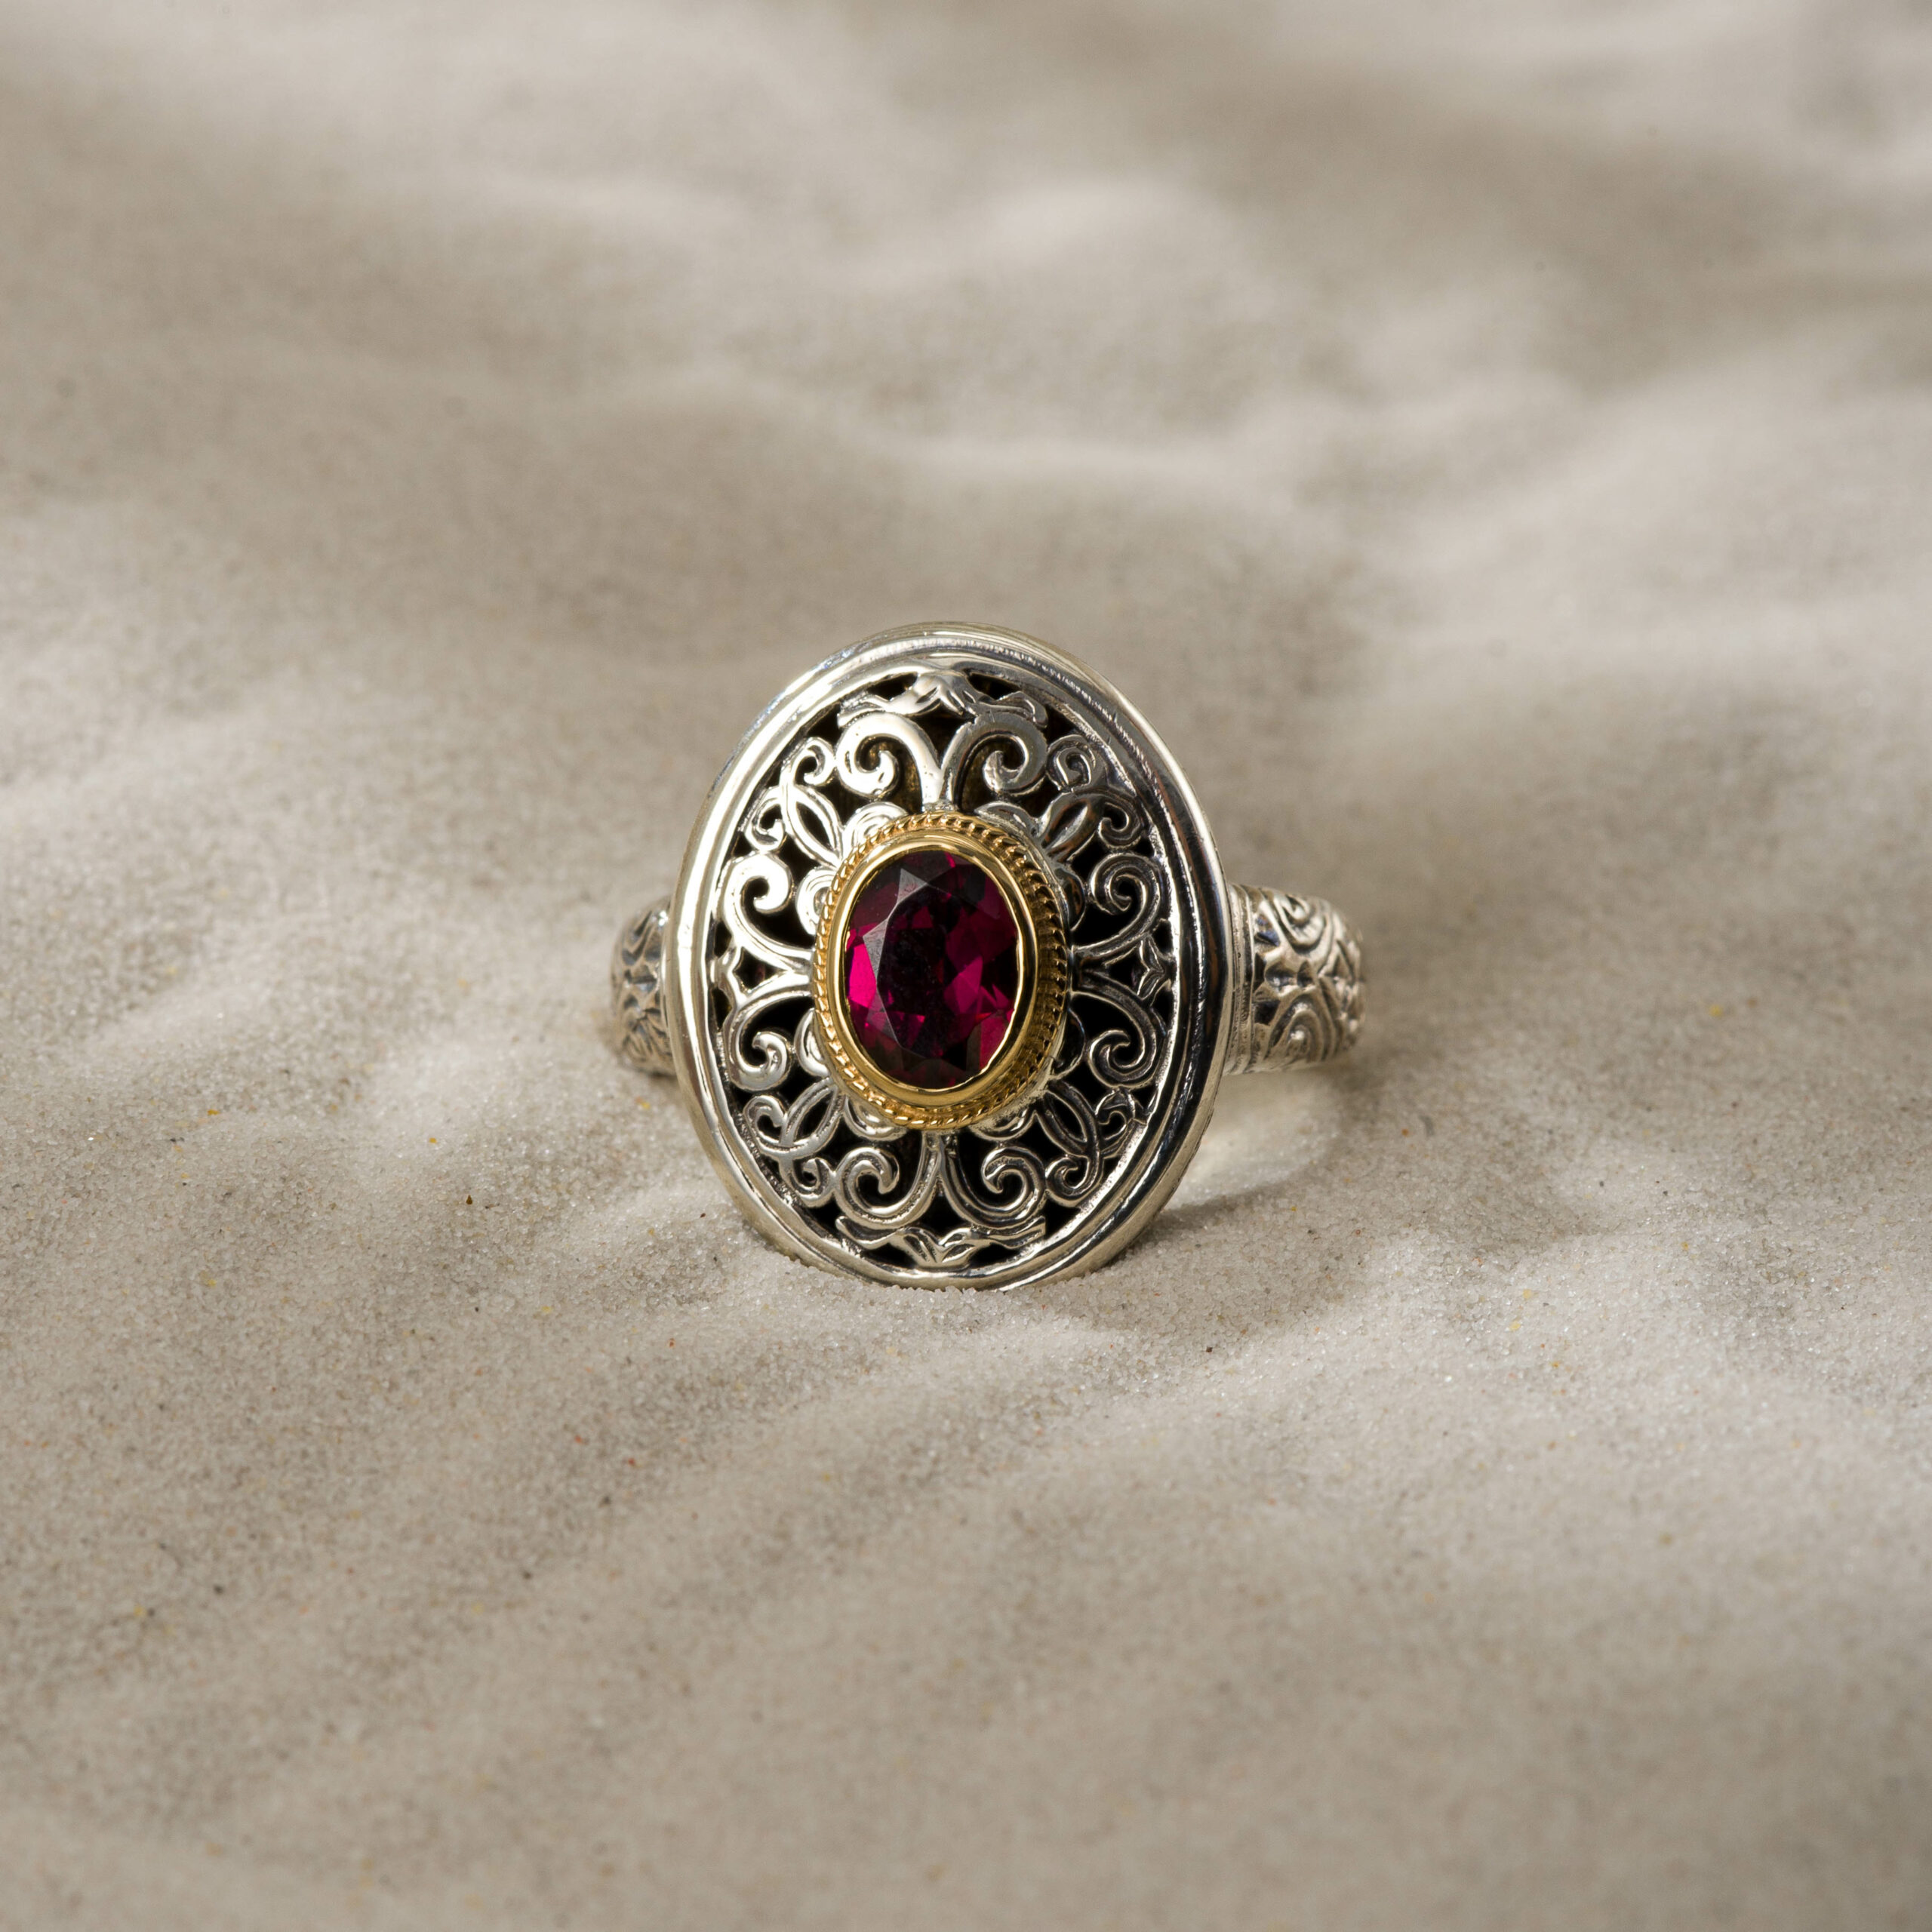 Mediterranean oval ring in 18K Gold and Sterling Silver with Rhodolite